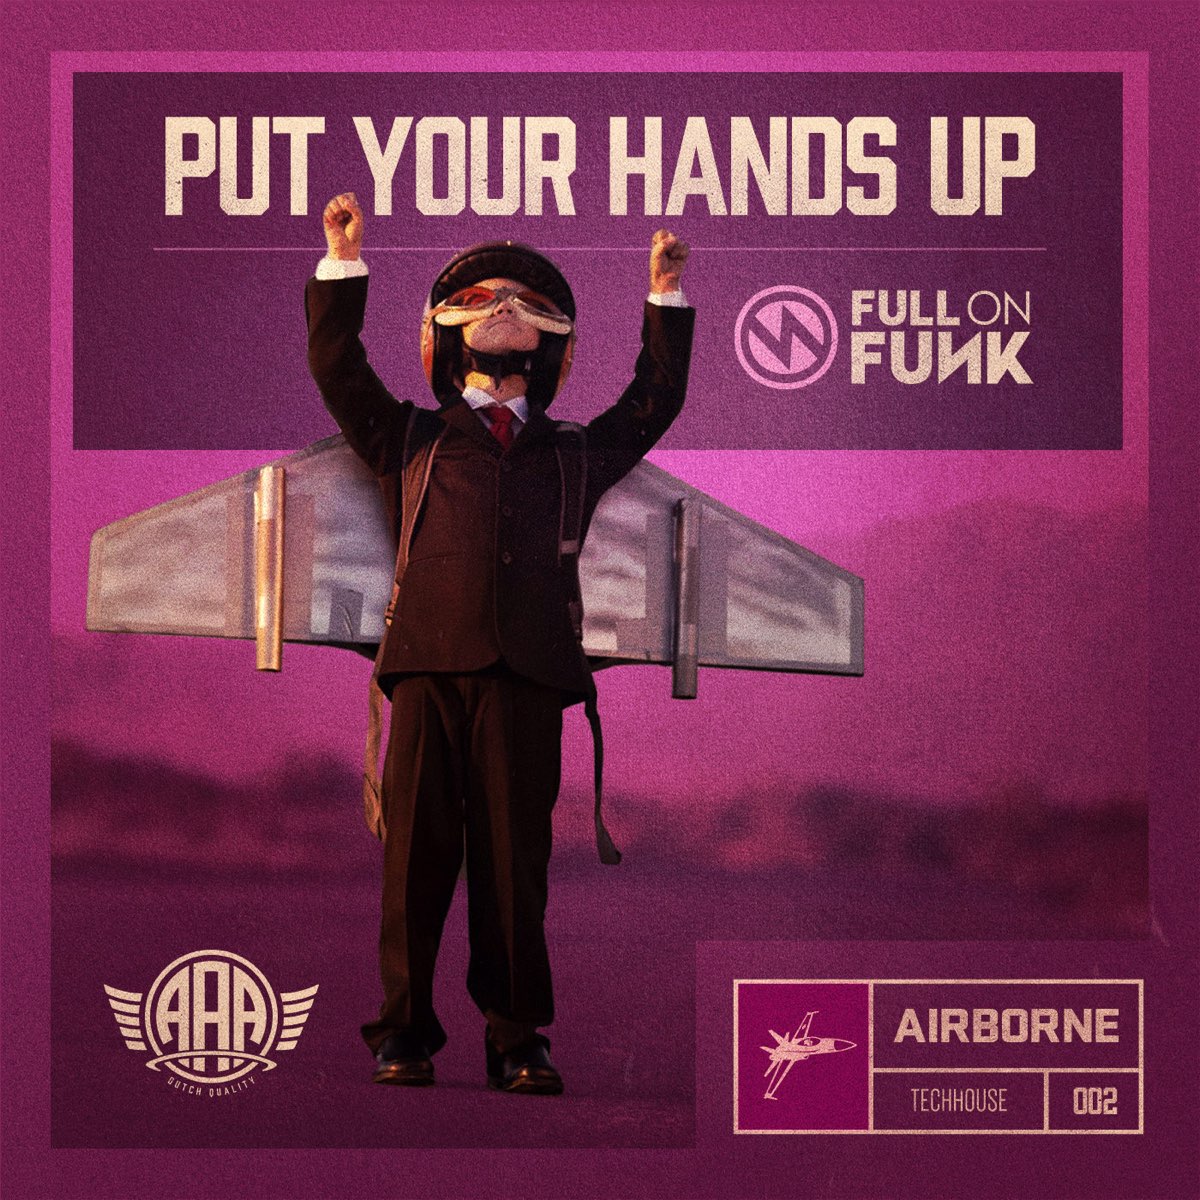 Put your hands up.